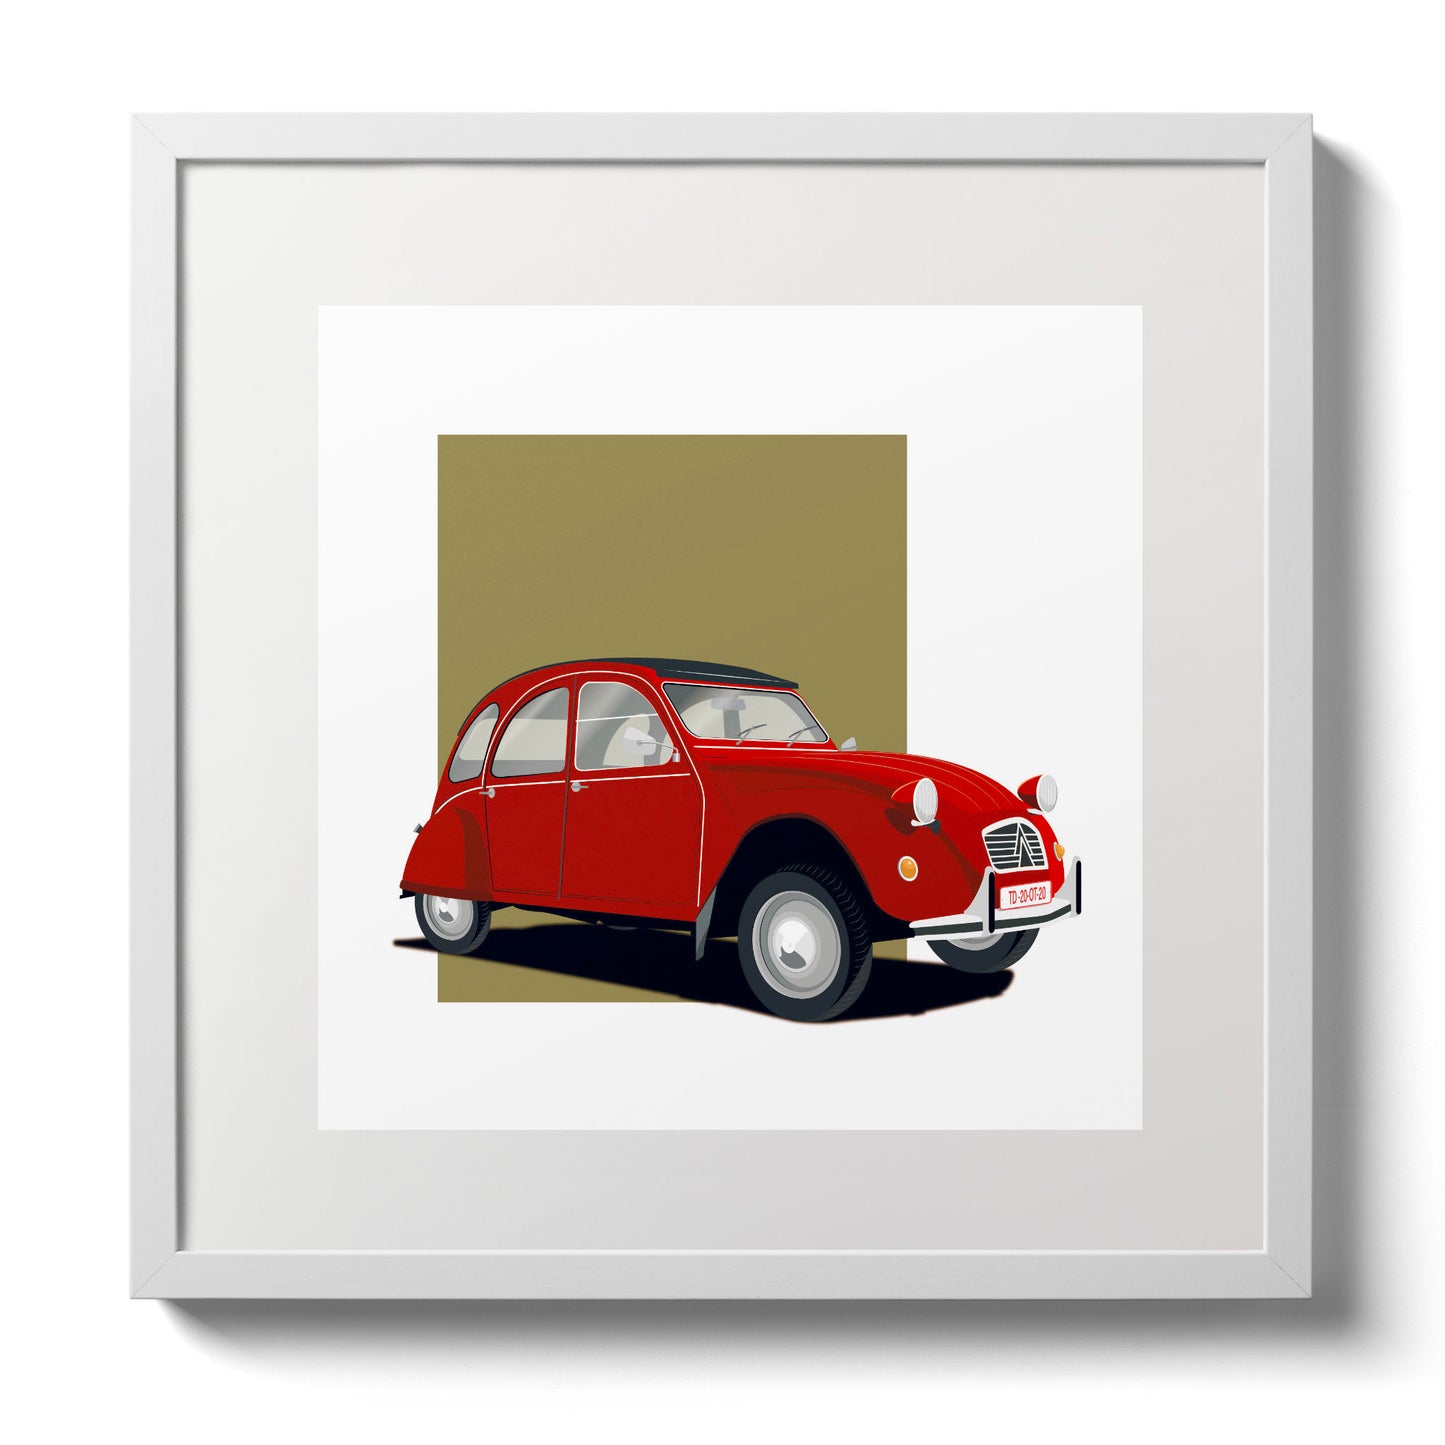 Illustration of a red Citroën 2CV, in a white frame and measuring 30 by 30 cm